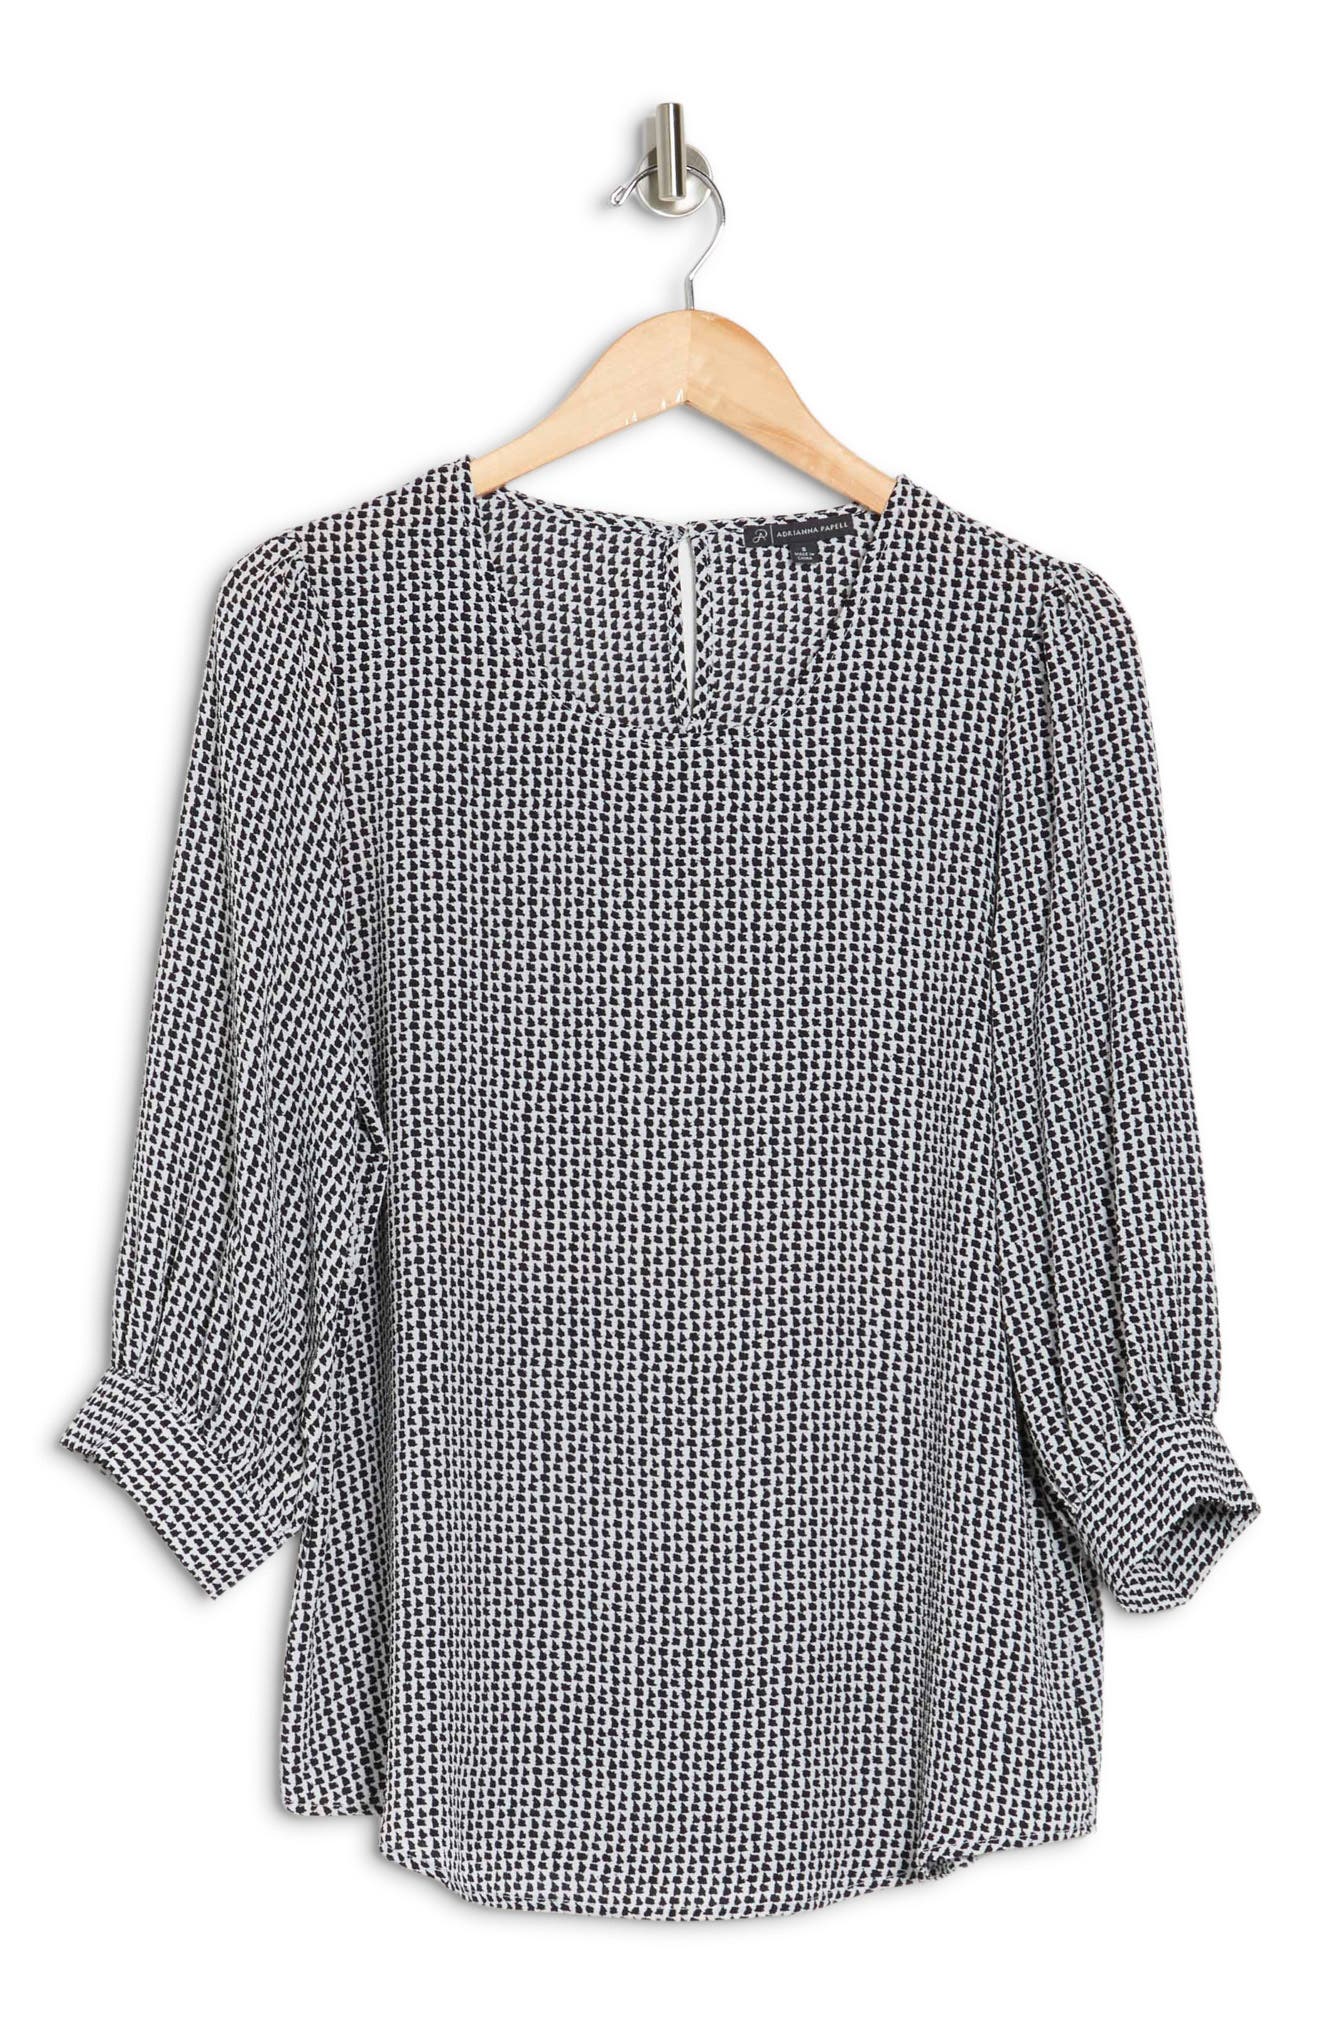 Adrianna Papell Pebbled 3/4 Sleeve Crepe Blouse In Ivory/ Black Sketch Geo